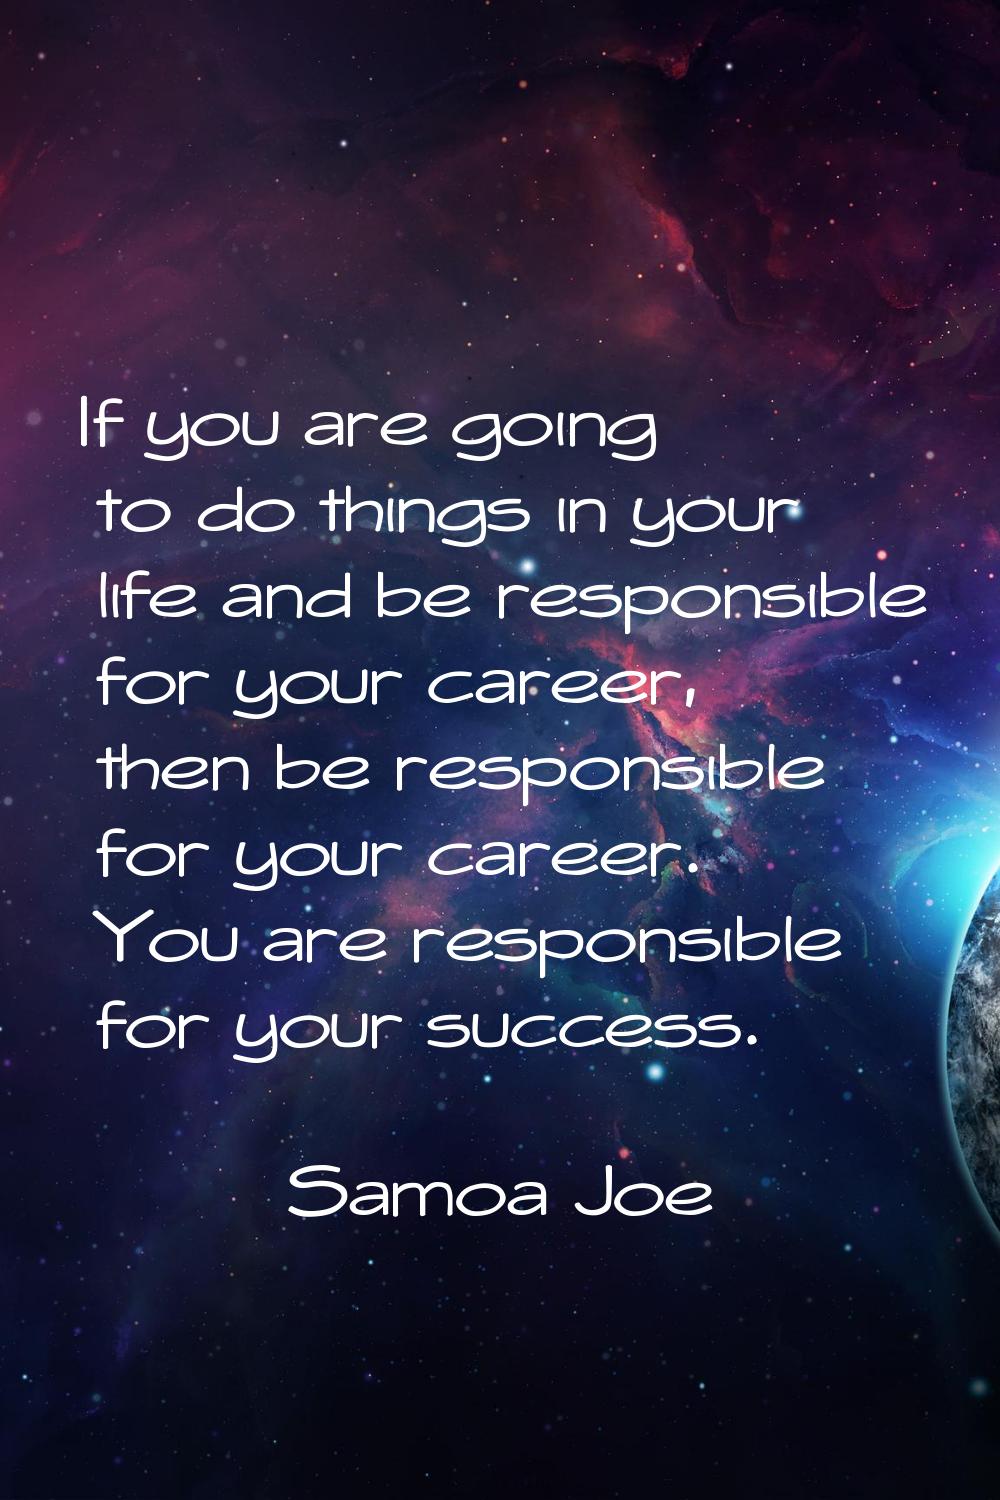 If you are going to do things in your life and be responsible for your career, then be responsible 